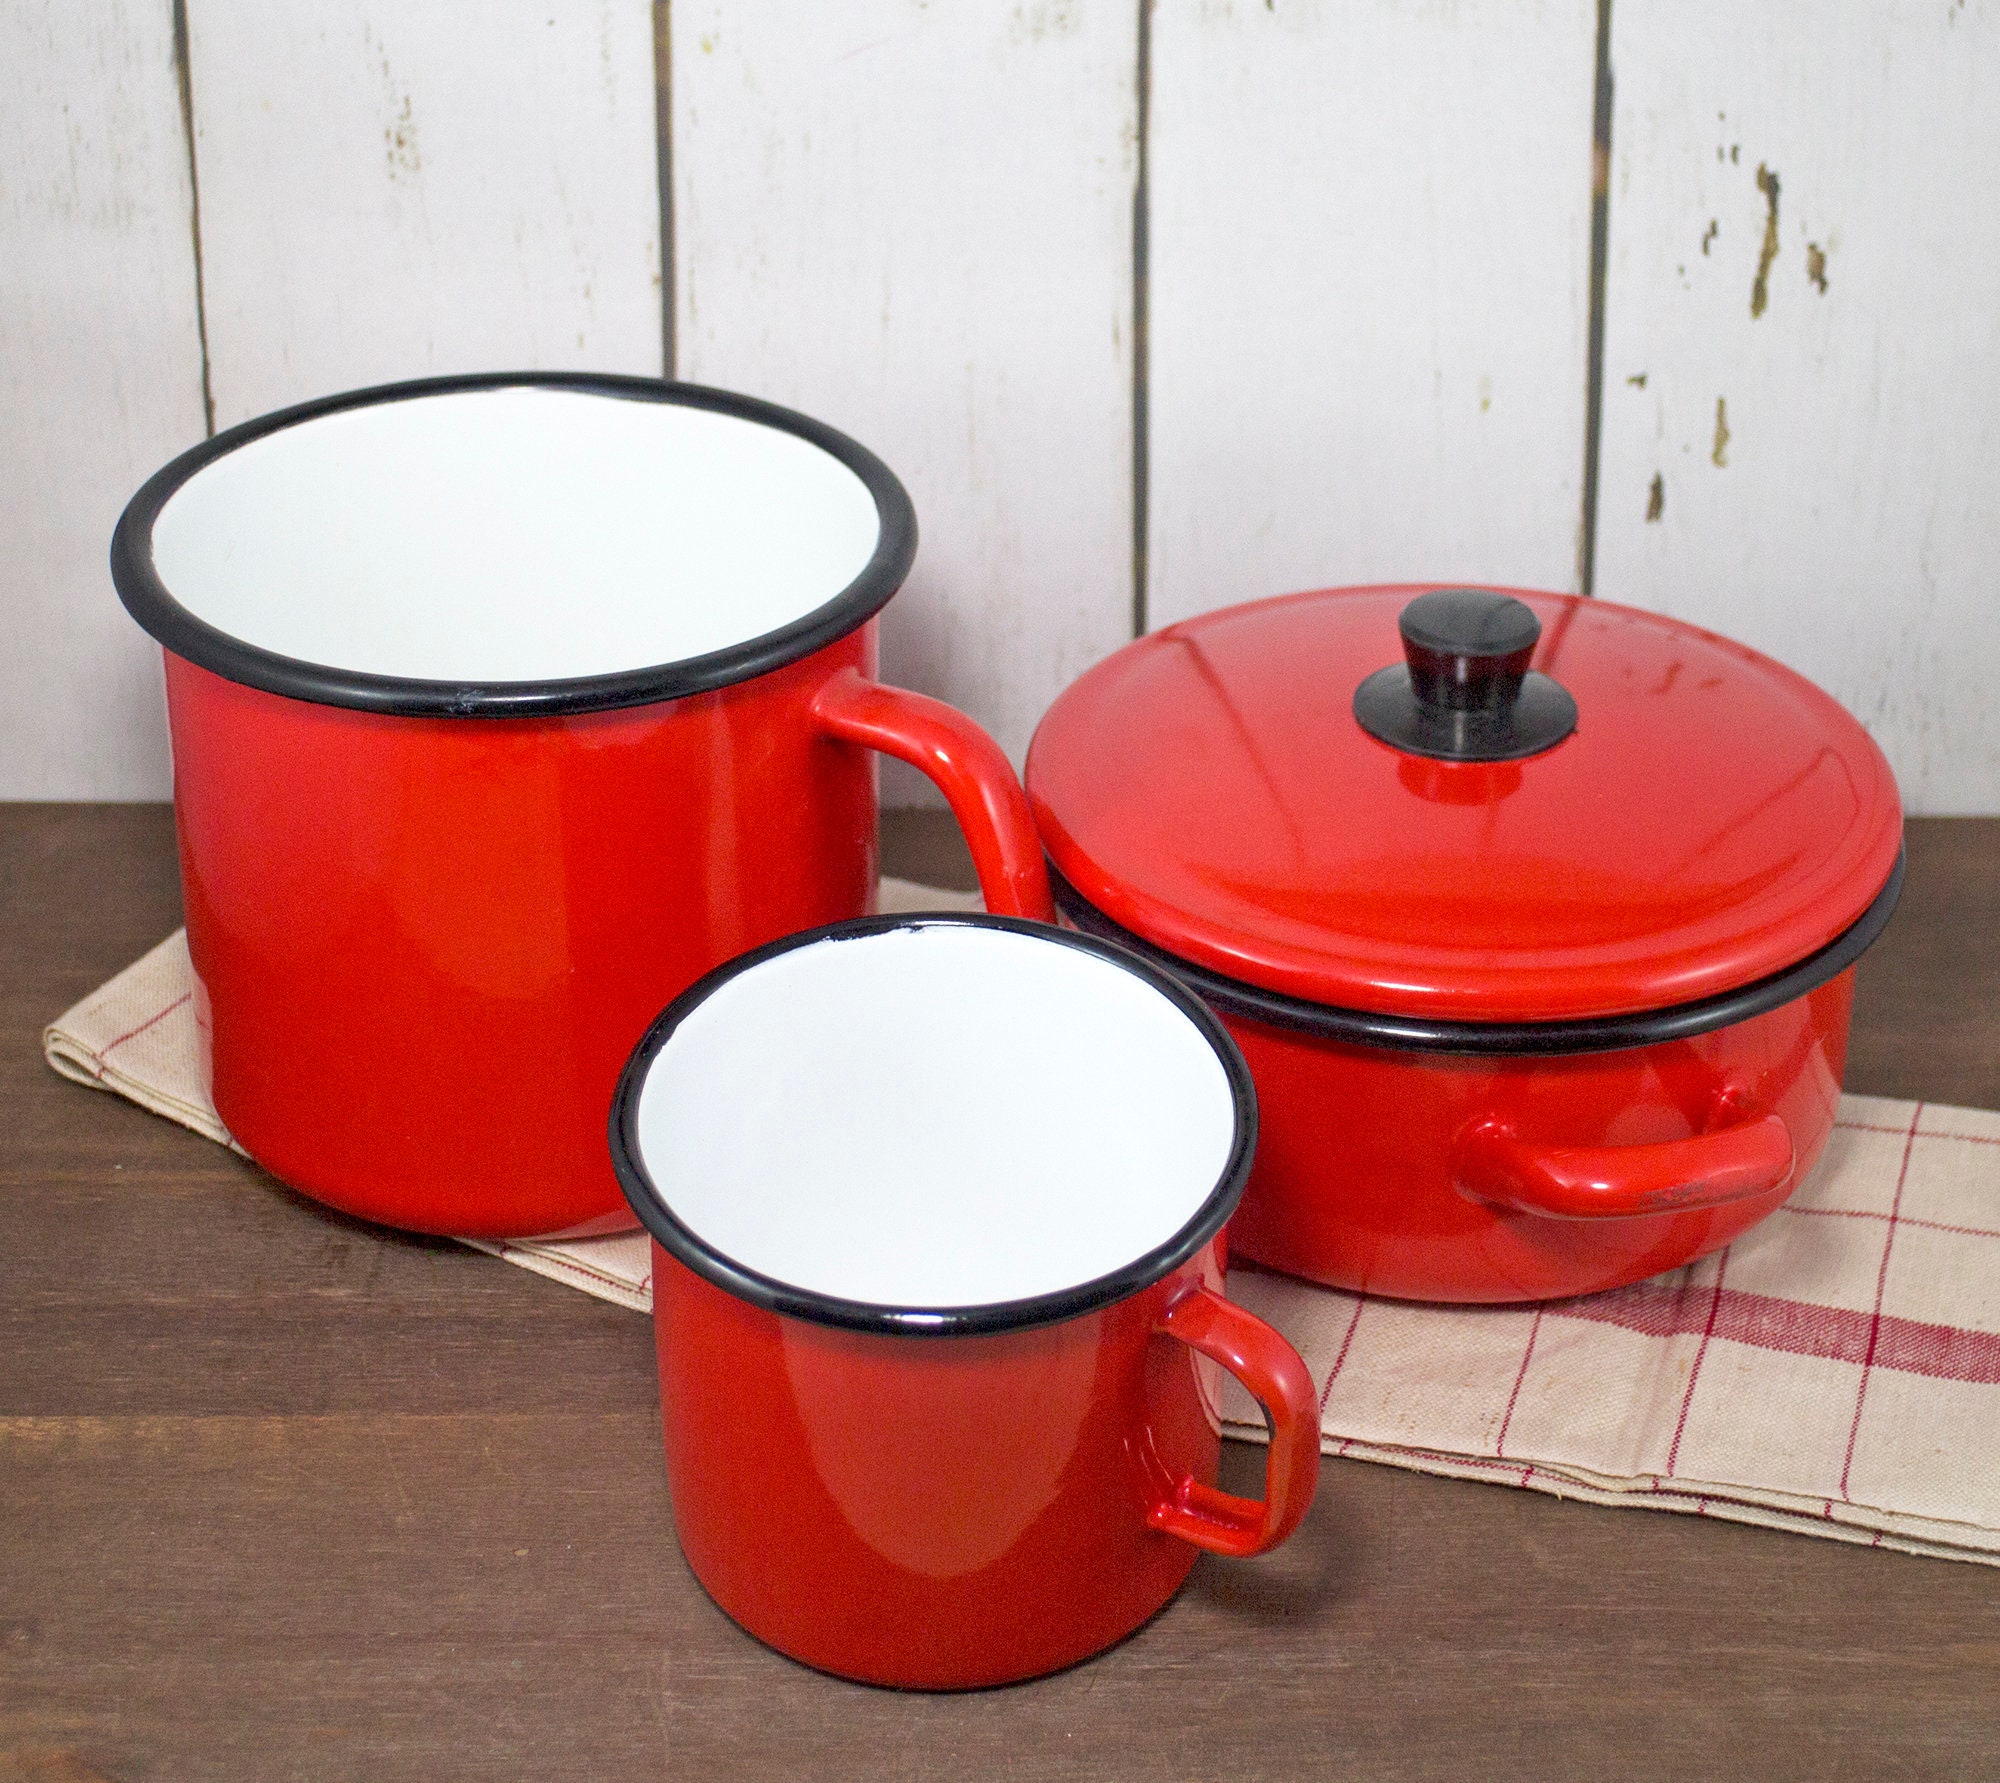 Enamel Cookware 3 Quart Stock Pot Dutch Oven Saucepan Vintage Distressed  White With Red Rim Round Enamelware Cooking Pan With Lid 